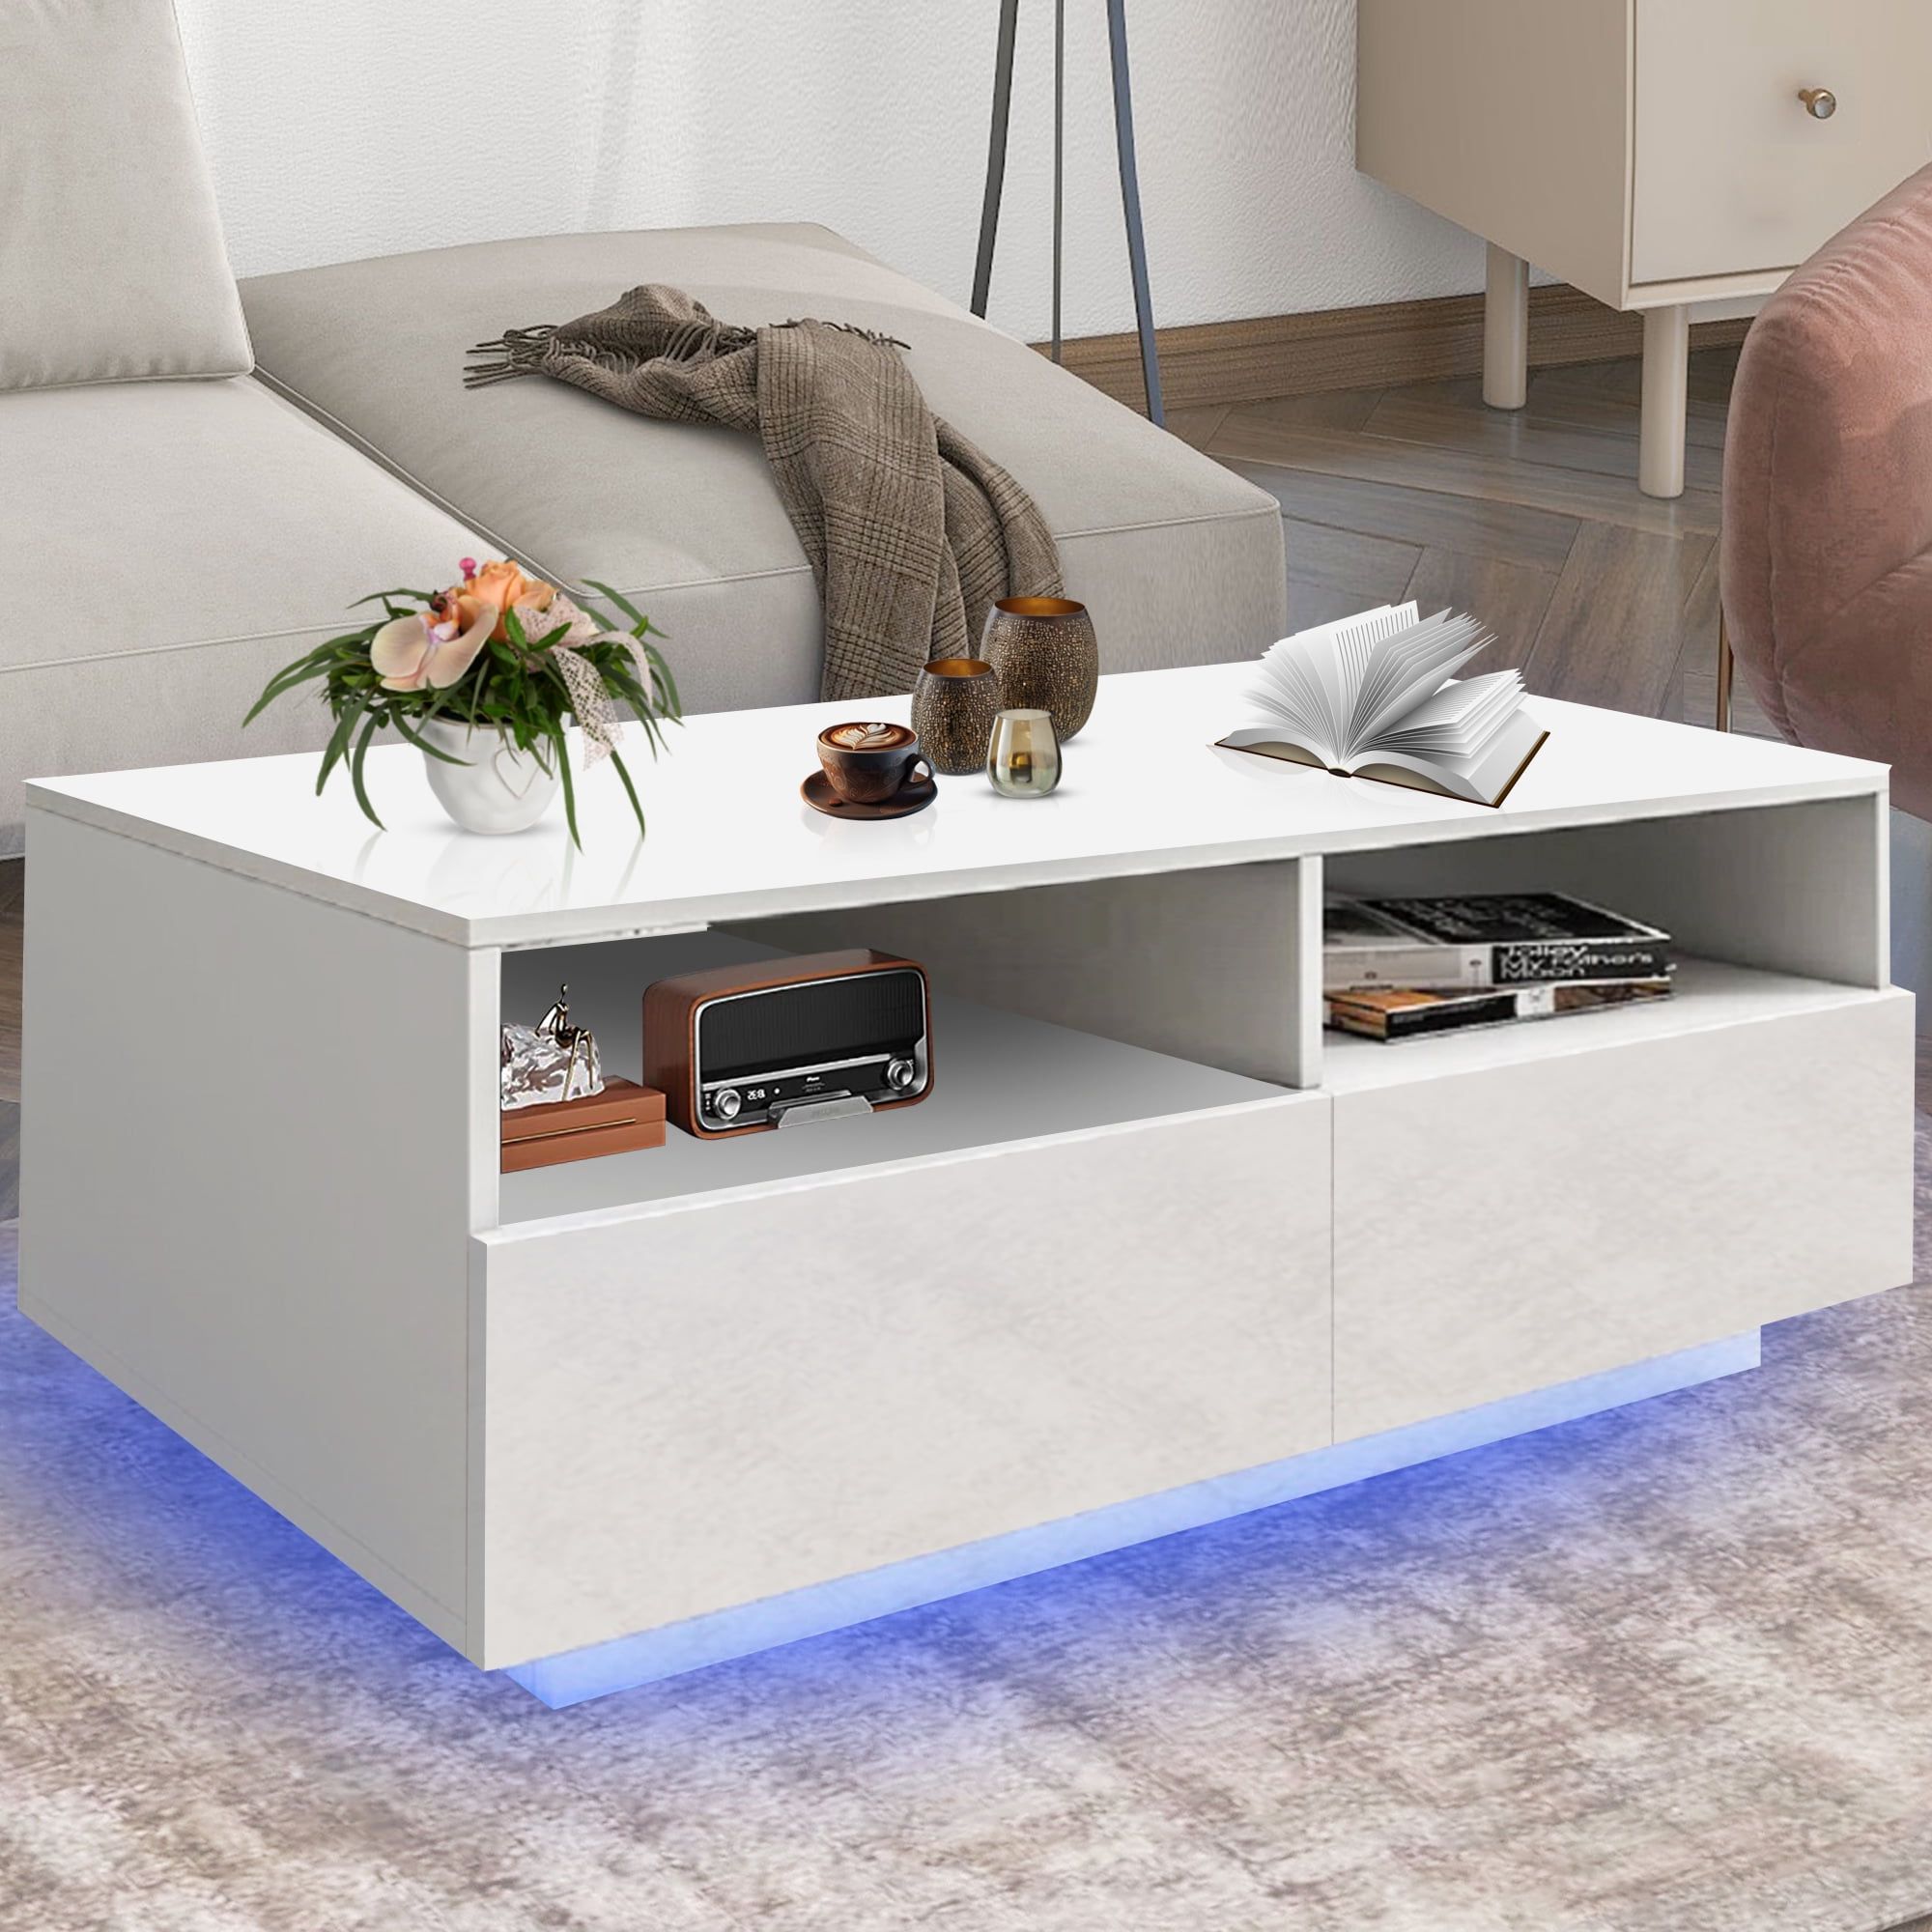 Most Recent Rectangular Led Coffee Tables Pertaining To Syngar Led Coffee Table With 4 Storage Sliding Drawers And Open Shelves,  Modern High Glossy Center Table Rectangular With Multiple Colors Led Lights  For Living Room Bedroom, Easy Assembly, White – Walmart (View 9 of 10)